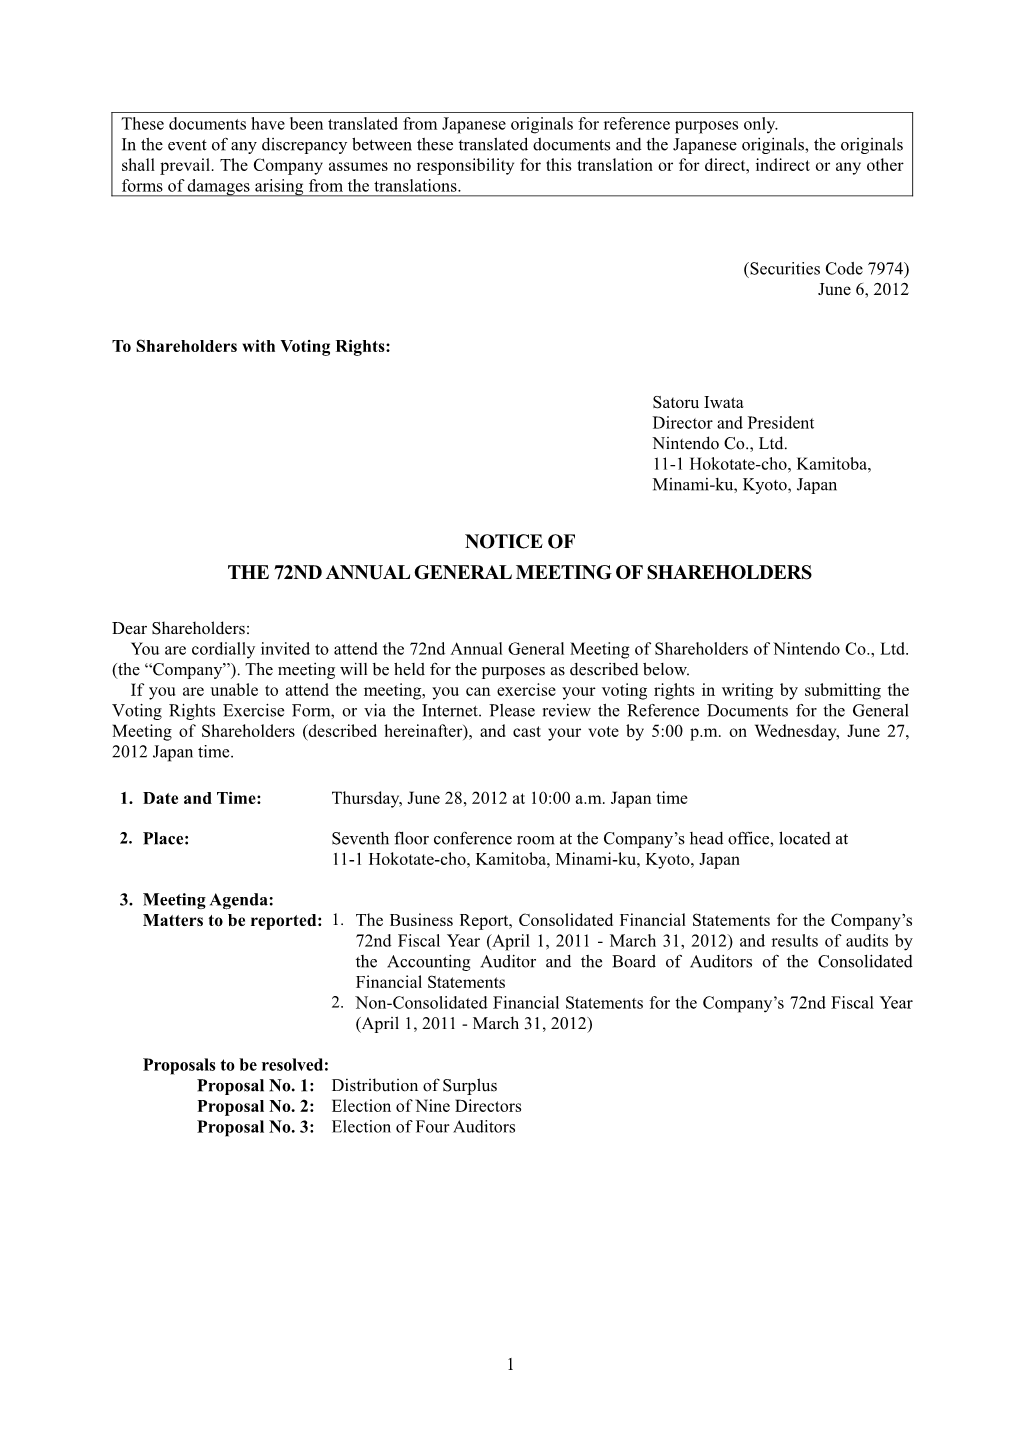 Notice of the 72Nd Annual General Meeting of Shareholders